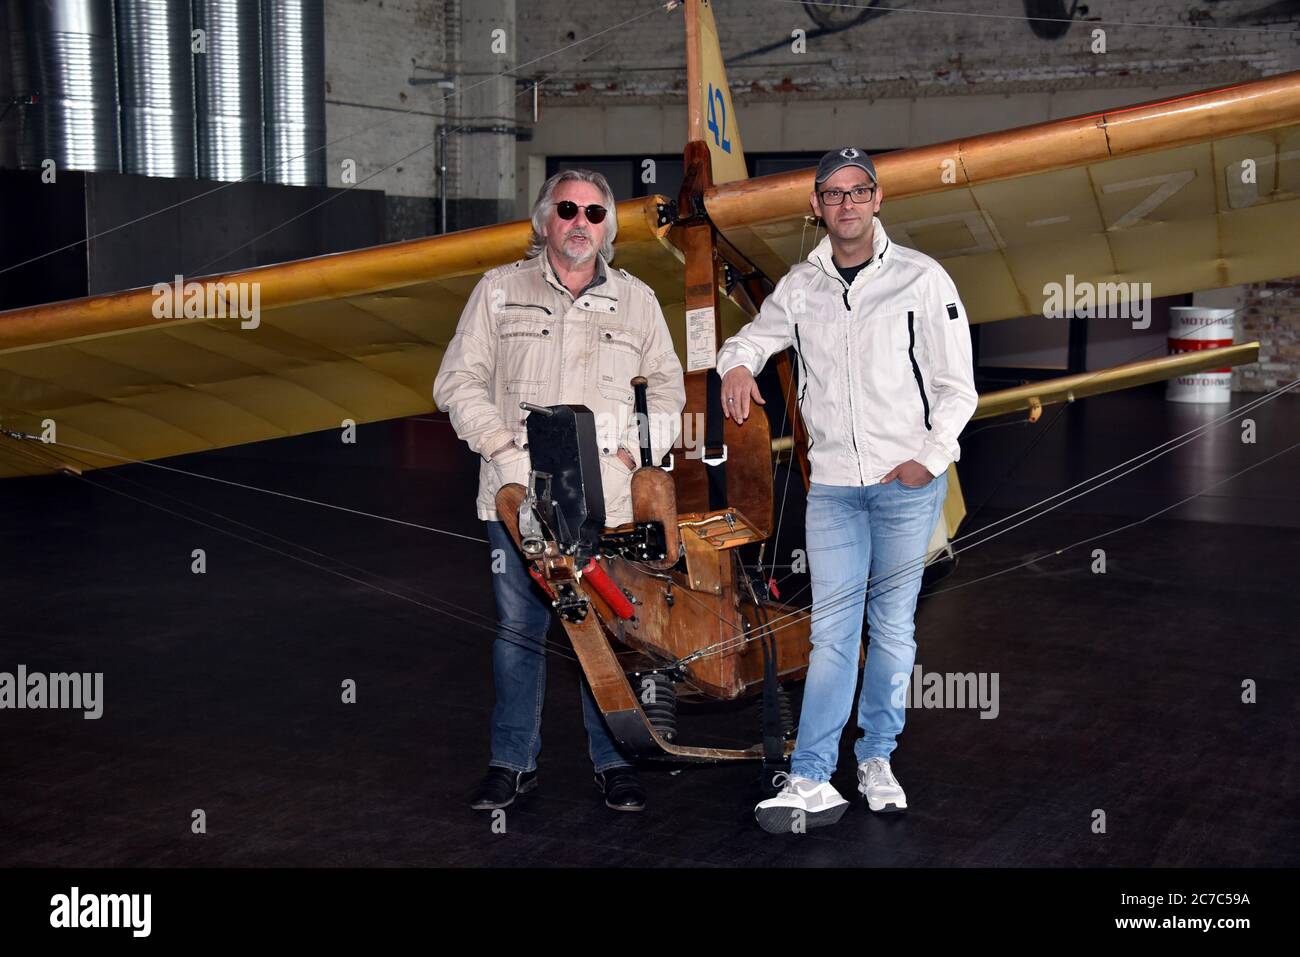 15 July 2020, North Rhine-Westphalia, Cologne: Musician Tommy Engel and comedian Marc Metzger, l-r, pose on a school glider SG 38, glider from 1942, during the presentation of the safety and hygiene concept of the dinner show 'Weihnachtsengel' which will be shown from 20.11.2020. Photo: Horst Galuschka/dpa/Horst Galuschka  dpa Stock Photo